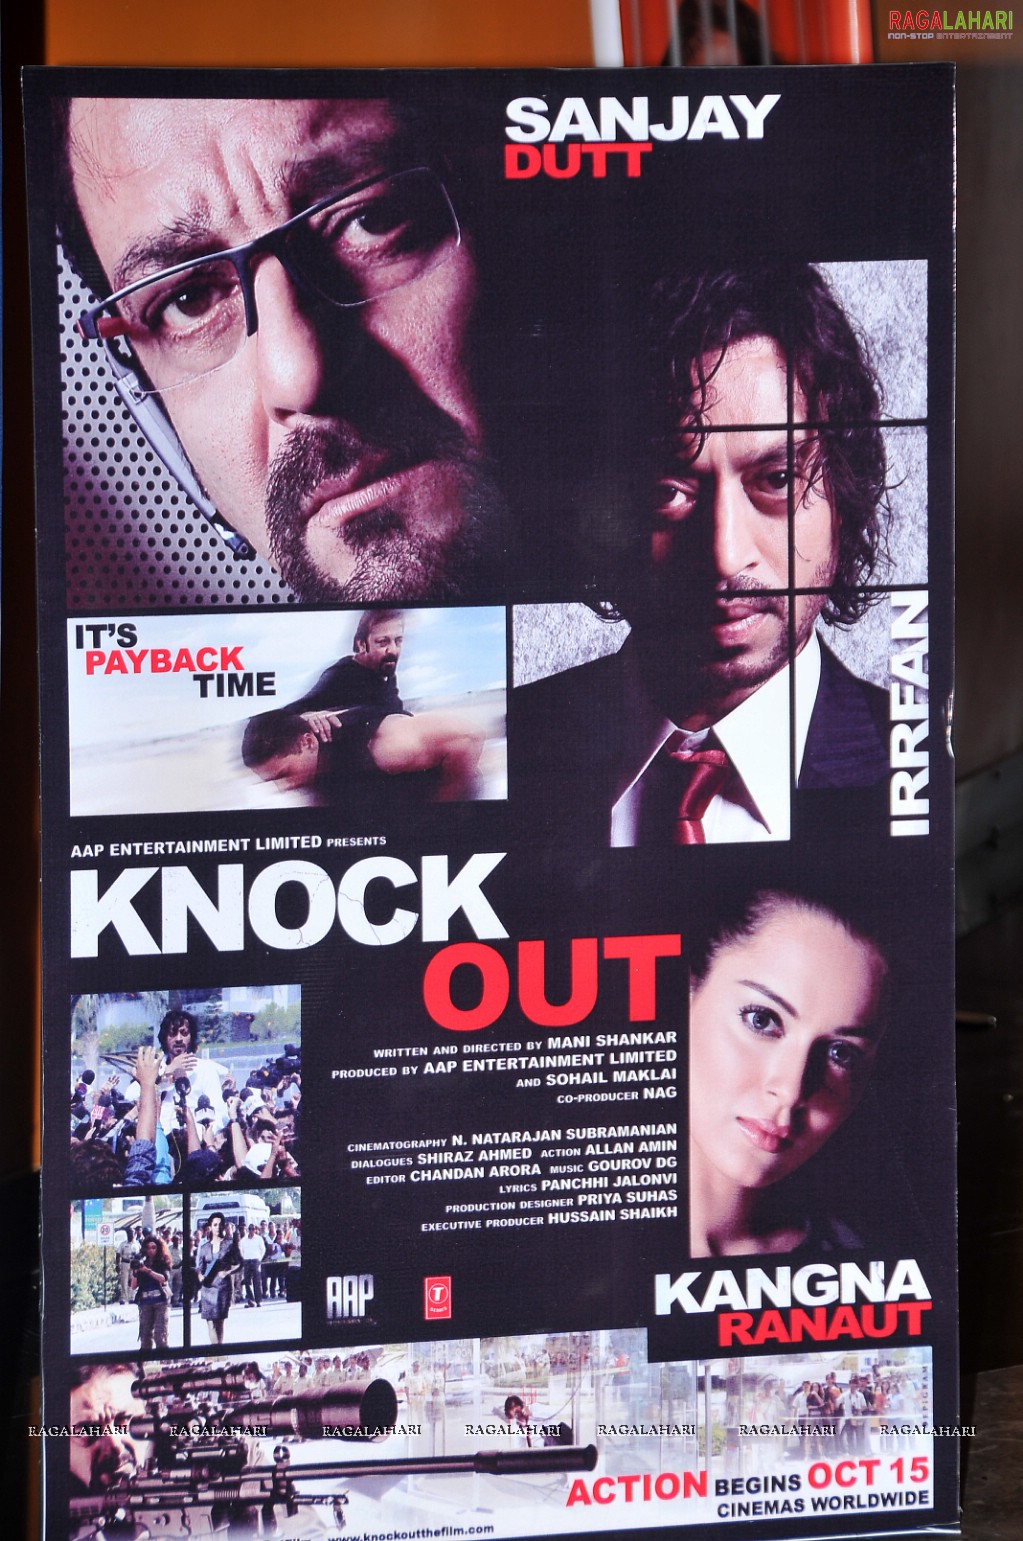 Knock Out Promotion @ PVR Cinemas, Hyd